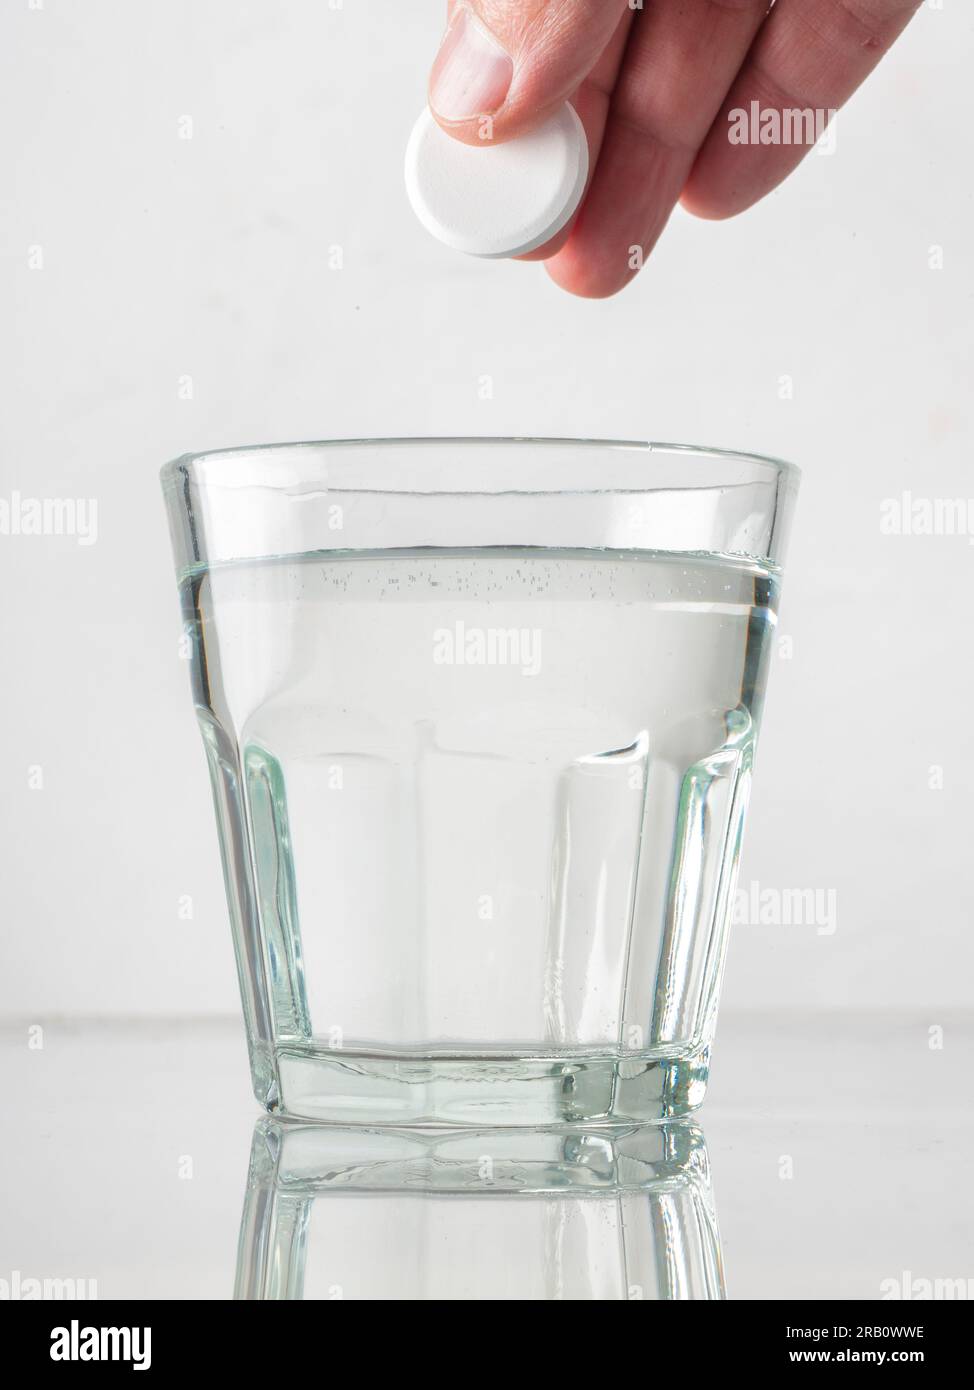 Male hand dropping a painkiller pill in a glass of water Stock Photo